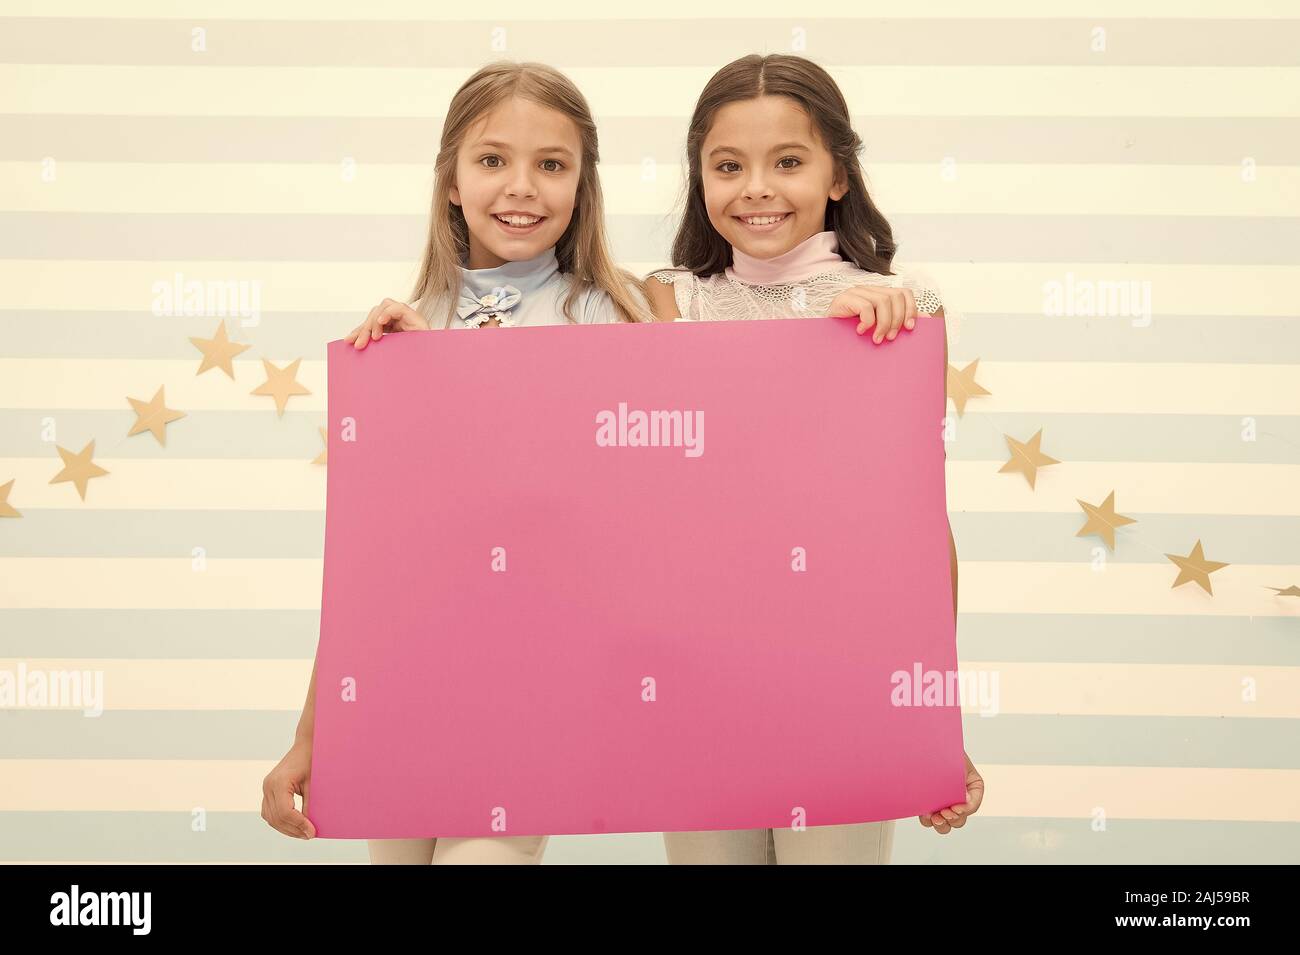 For your text. Happy children holding empty sheet of paper. Little children smiling with pink drawing paper. Small children with blank advertisement p Stock Photo